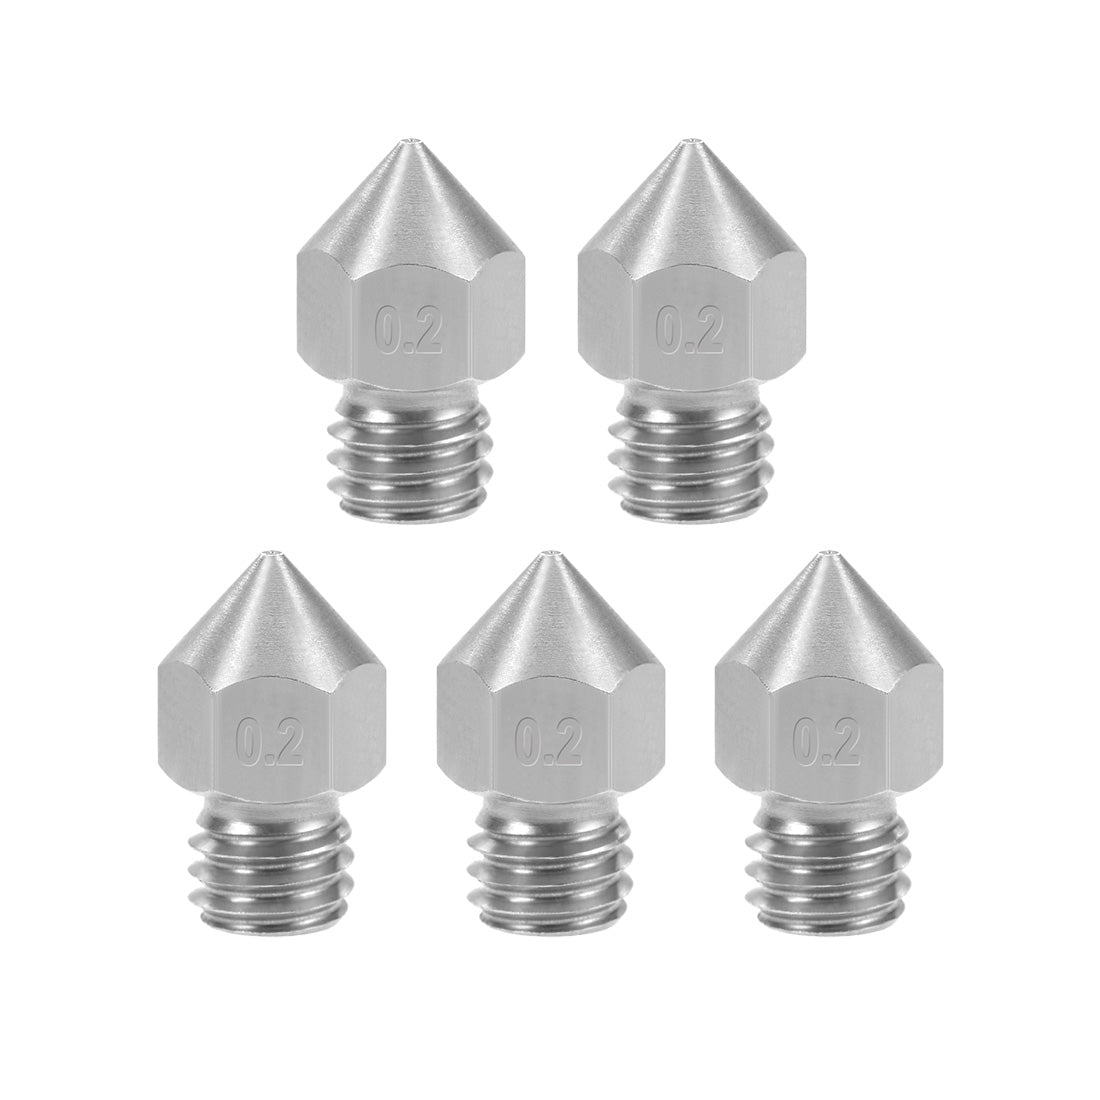 uxcell Uxcell 0.2mm 3D Printer Nozzle Head M6 for MK8 1.75mm, Stainless Steel 5pcs